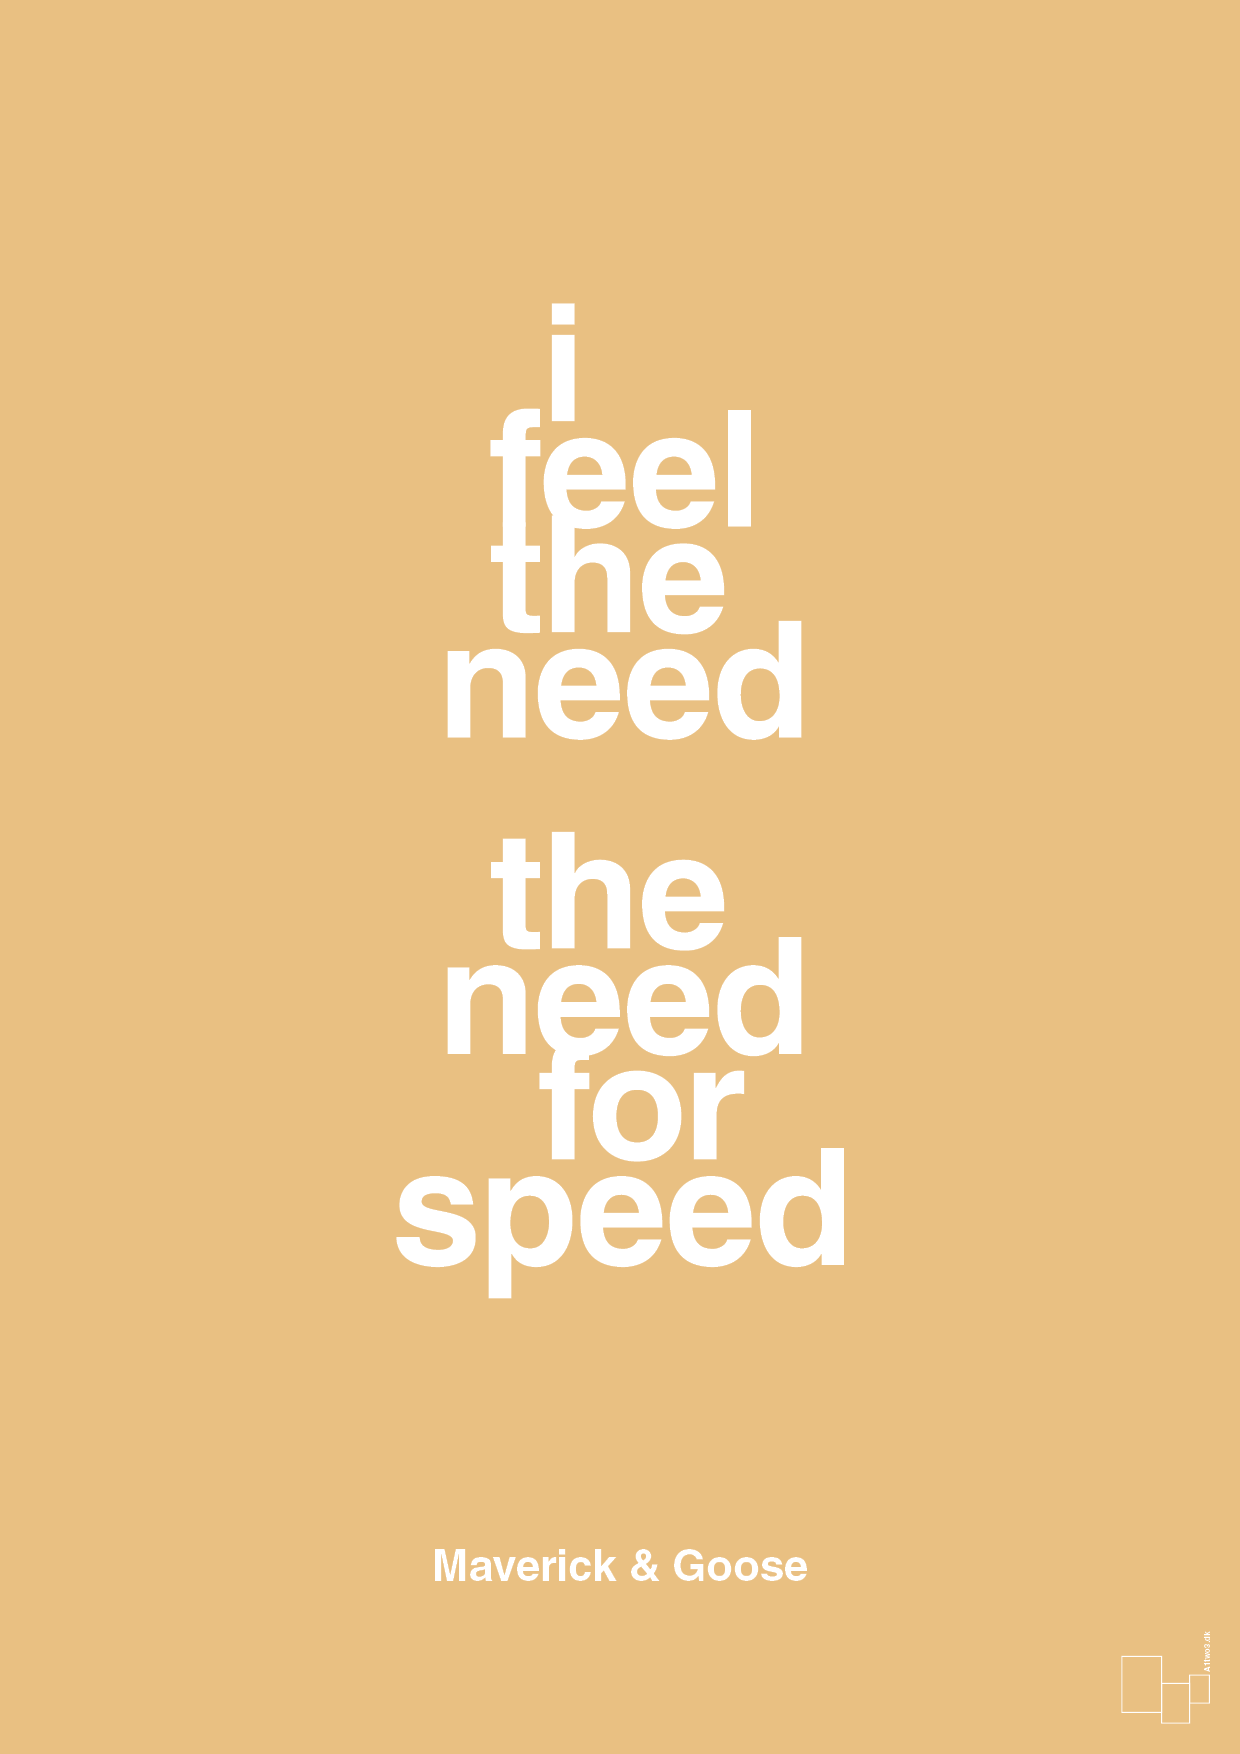 i feel the need the need for speed - Plakat med Citater i Charismatic